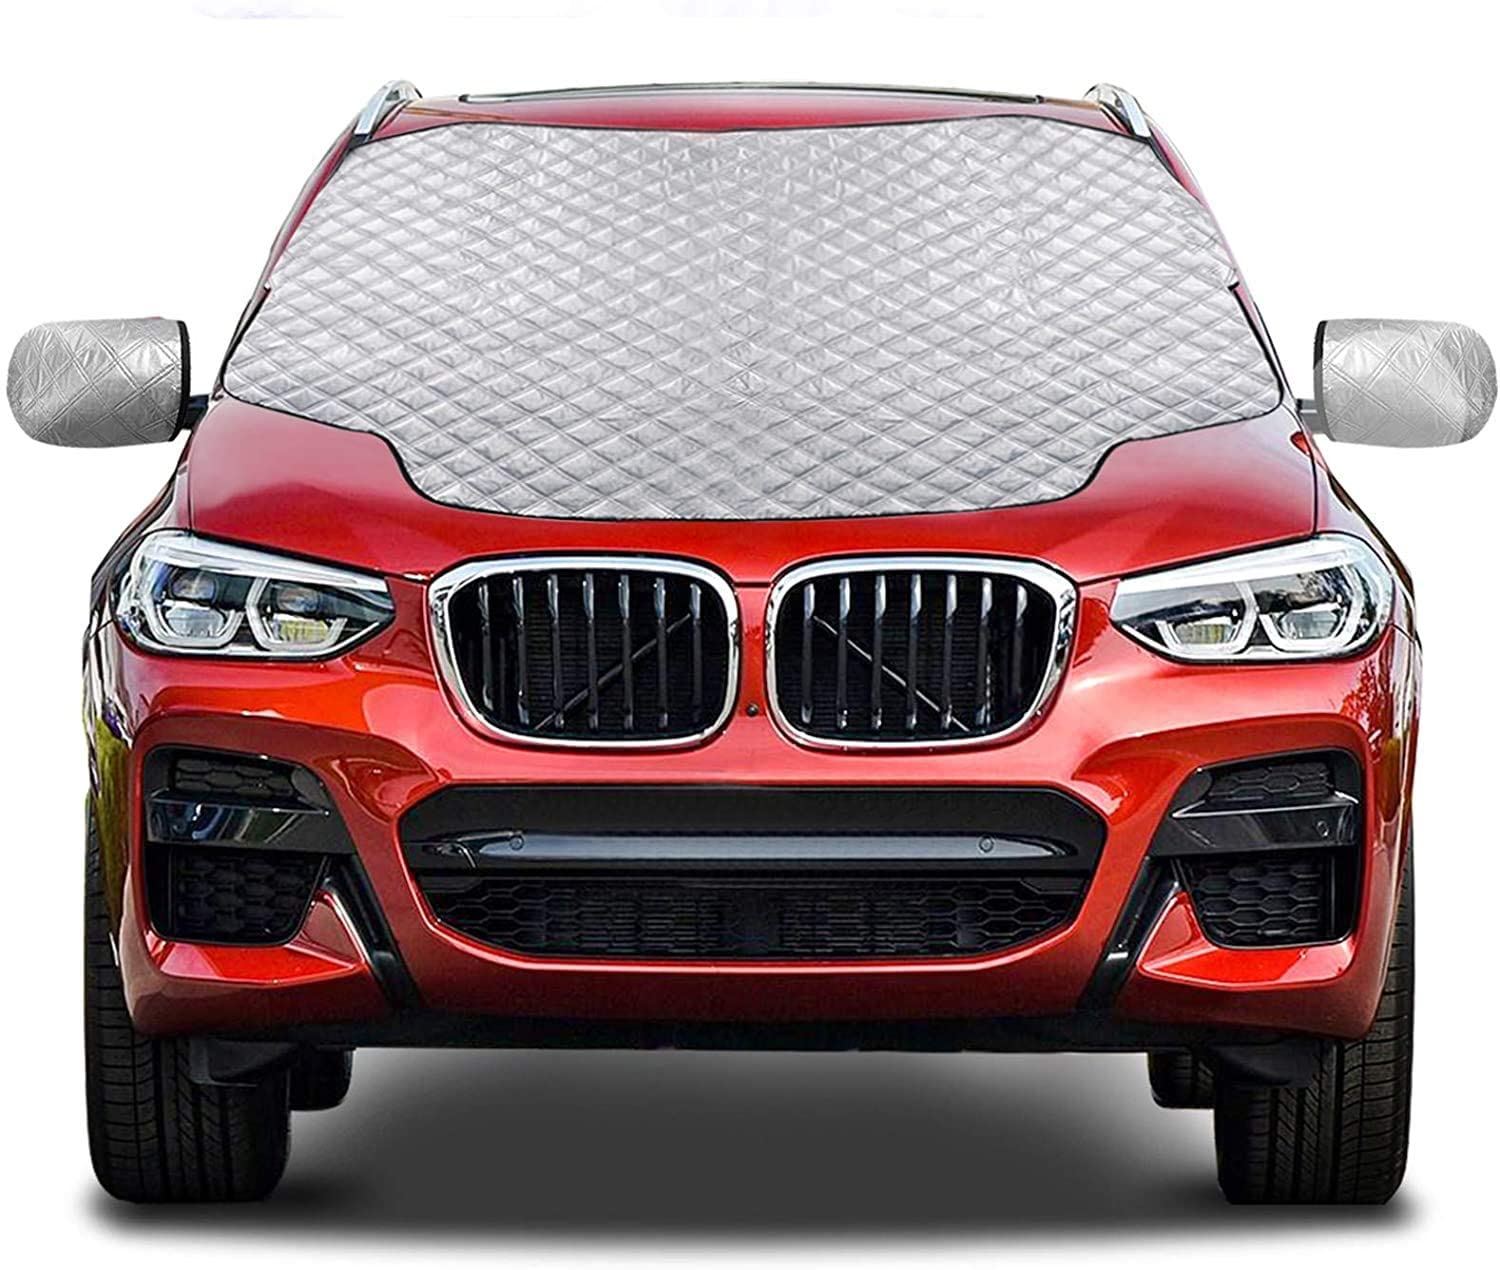 Straps & Magnets Double Design Kenw Windshield Snow Cover,85x50Windshield Snow Cover,Extra Large Size Fits Any Car Windshield Snow Cover Prevents Snow and Frost Damage to The Glass